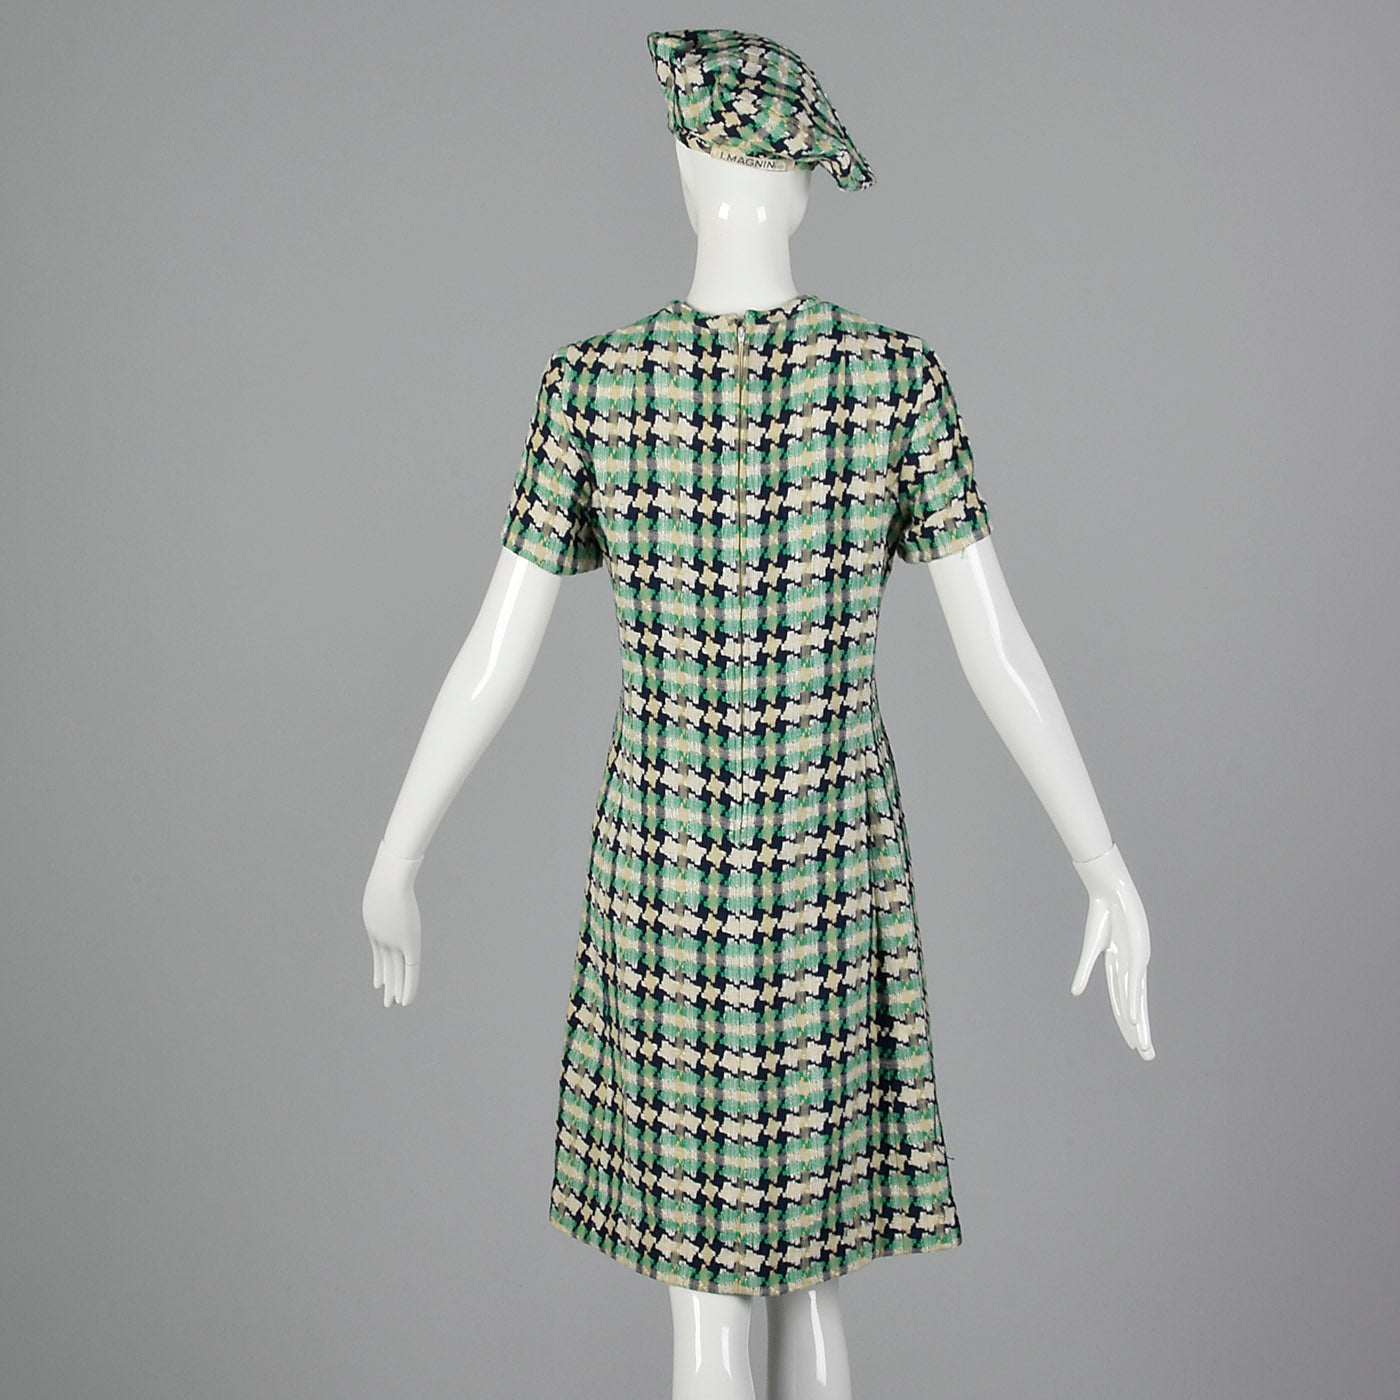 1960s I. Magnin Tweed Dress with Matching Jacket, Scarf, and Beret